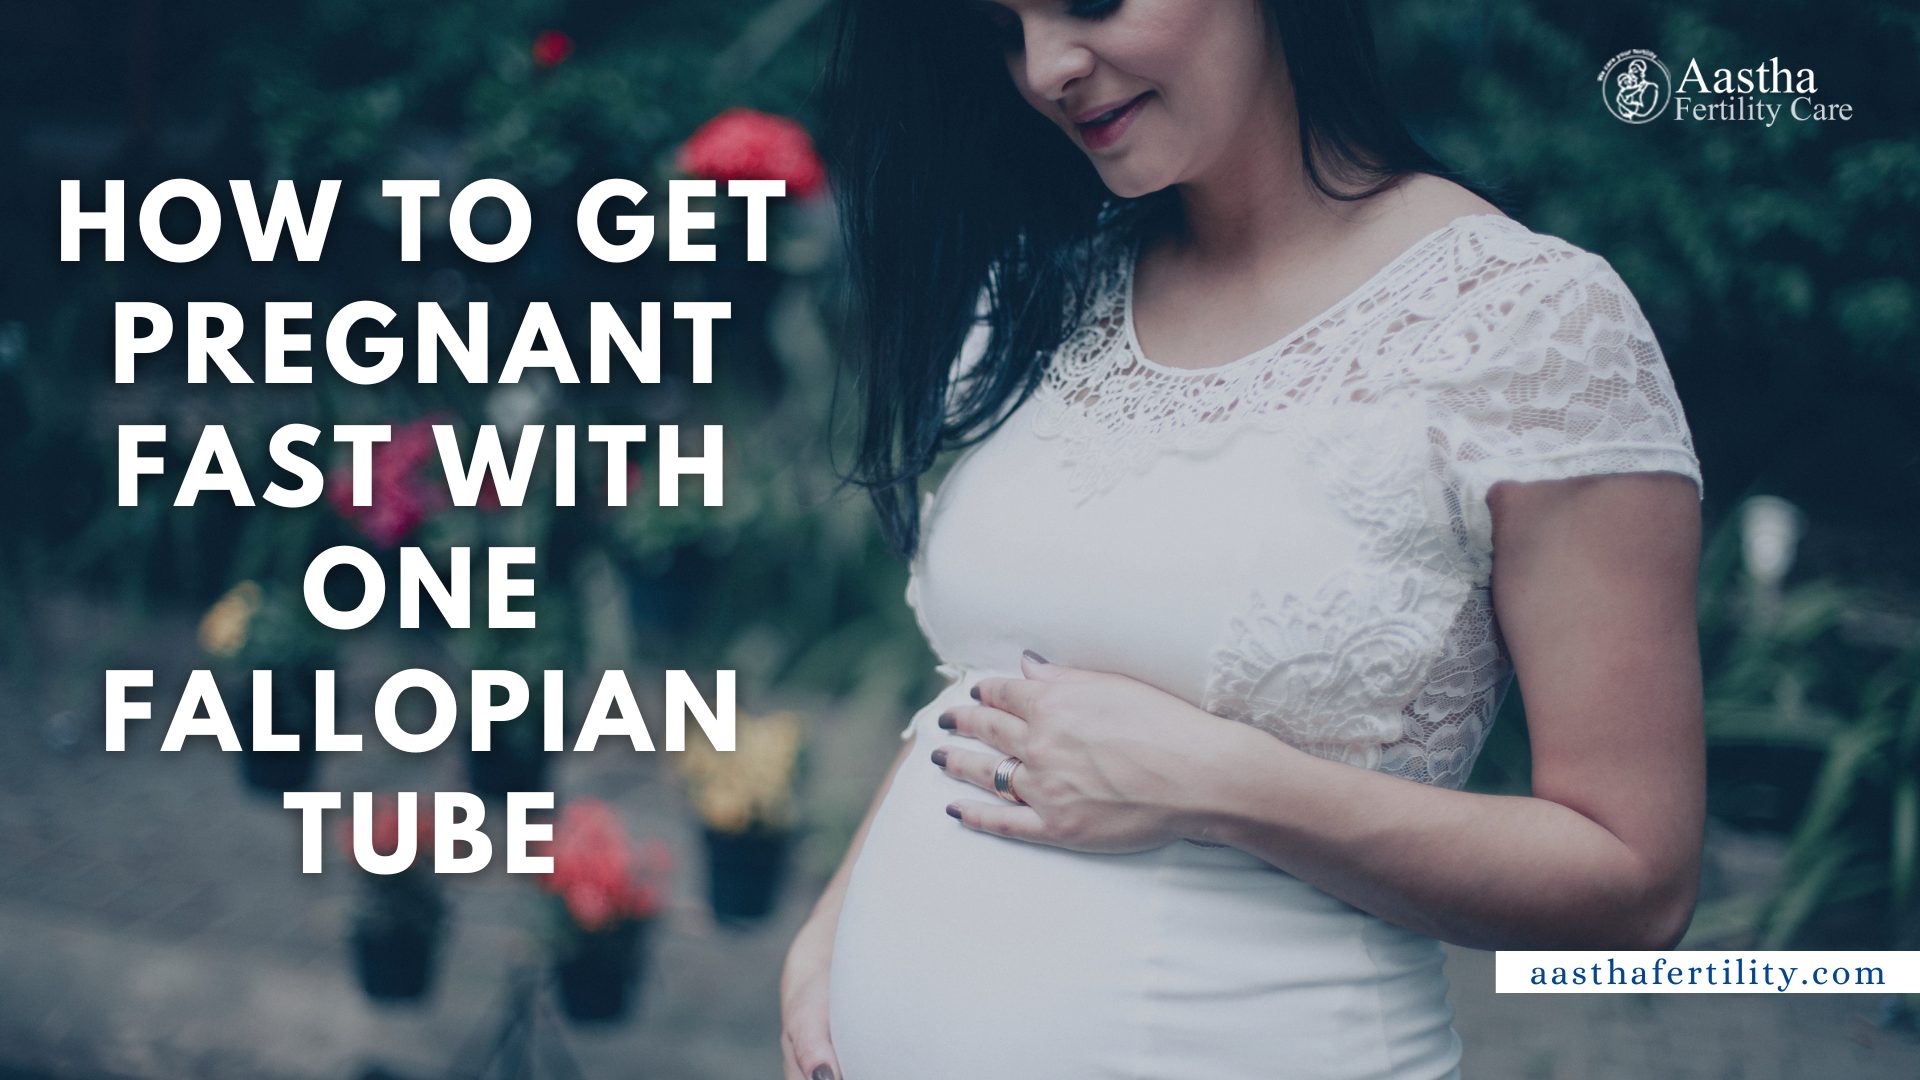 How to get pregnant fast with one fallopian tube